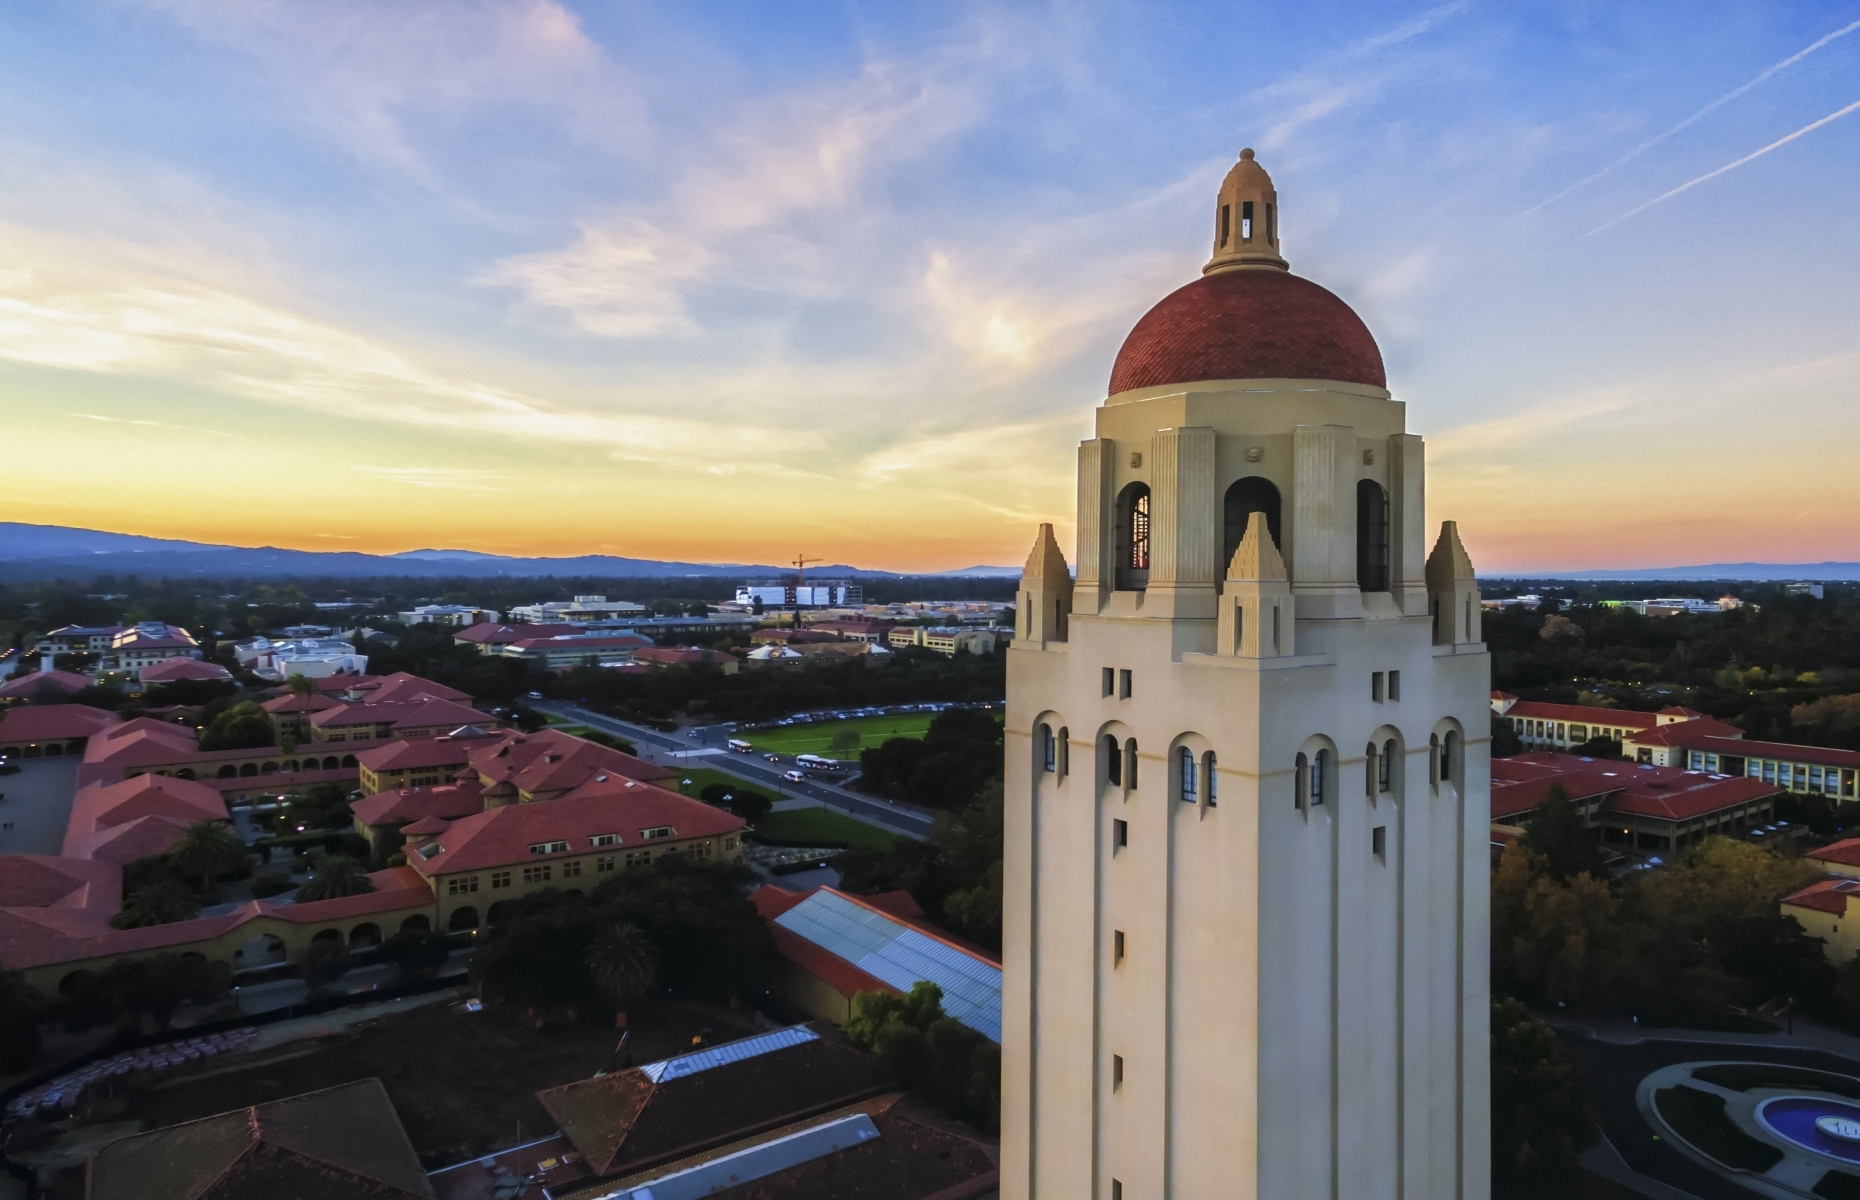 <p>Nicknamed “the farm” for its origins as the farm of founders Leland and Jane Stanford, the campus of Stanford University is famous for its tan walls, red roofs, manicured quads, and the 285-foot <a href="https://visit.stanford.edu/" rel="noreferrer noopener">Hoover Tower</a>.</p>